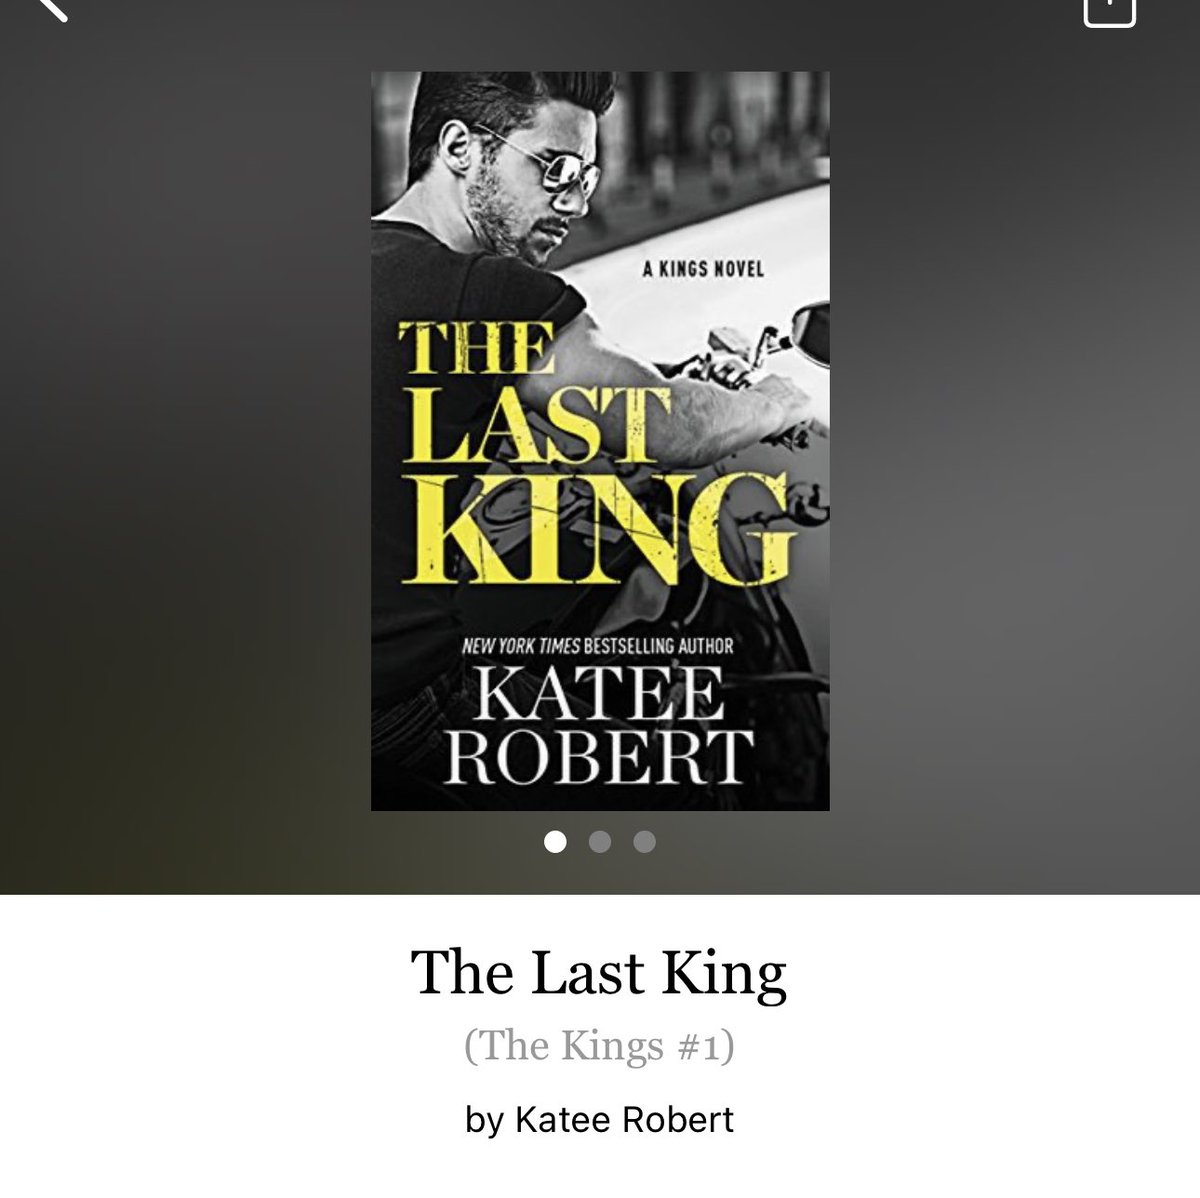 The Last King by Katee Robert 

#TheLastKing by #KateeRobert #4810 #24chapters #336pages #April2023 #353of400 #Series #Audiobook #59for15 #10hourAudiobook #TheKingsSeries #Book1of2 #BeckettAndSamara #clearingoffreadingshelves #whatsNext #readitquick